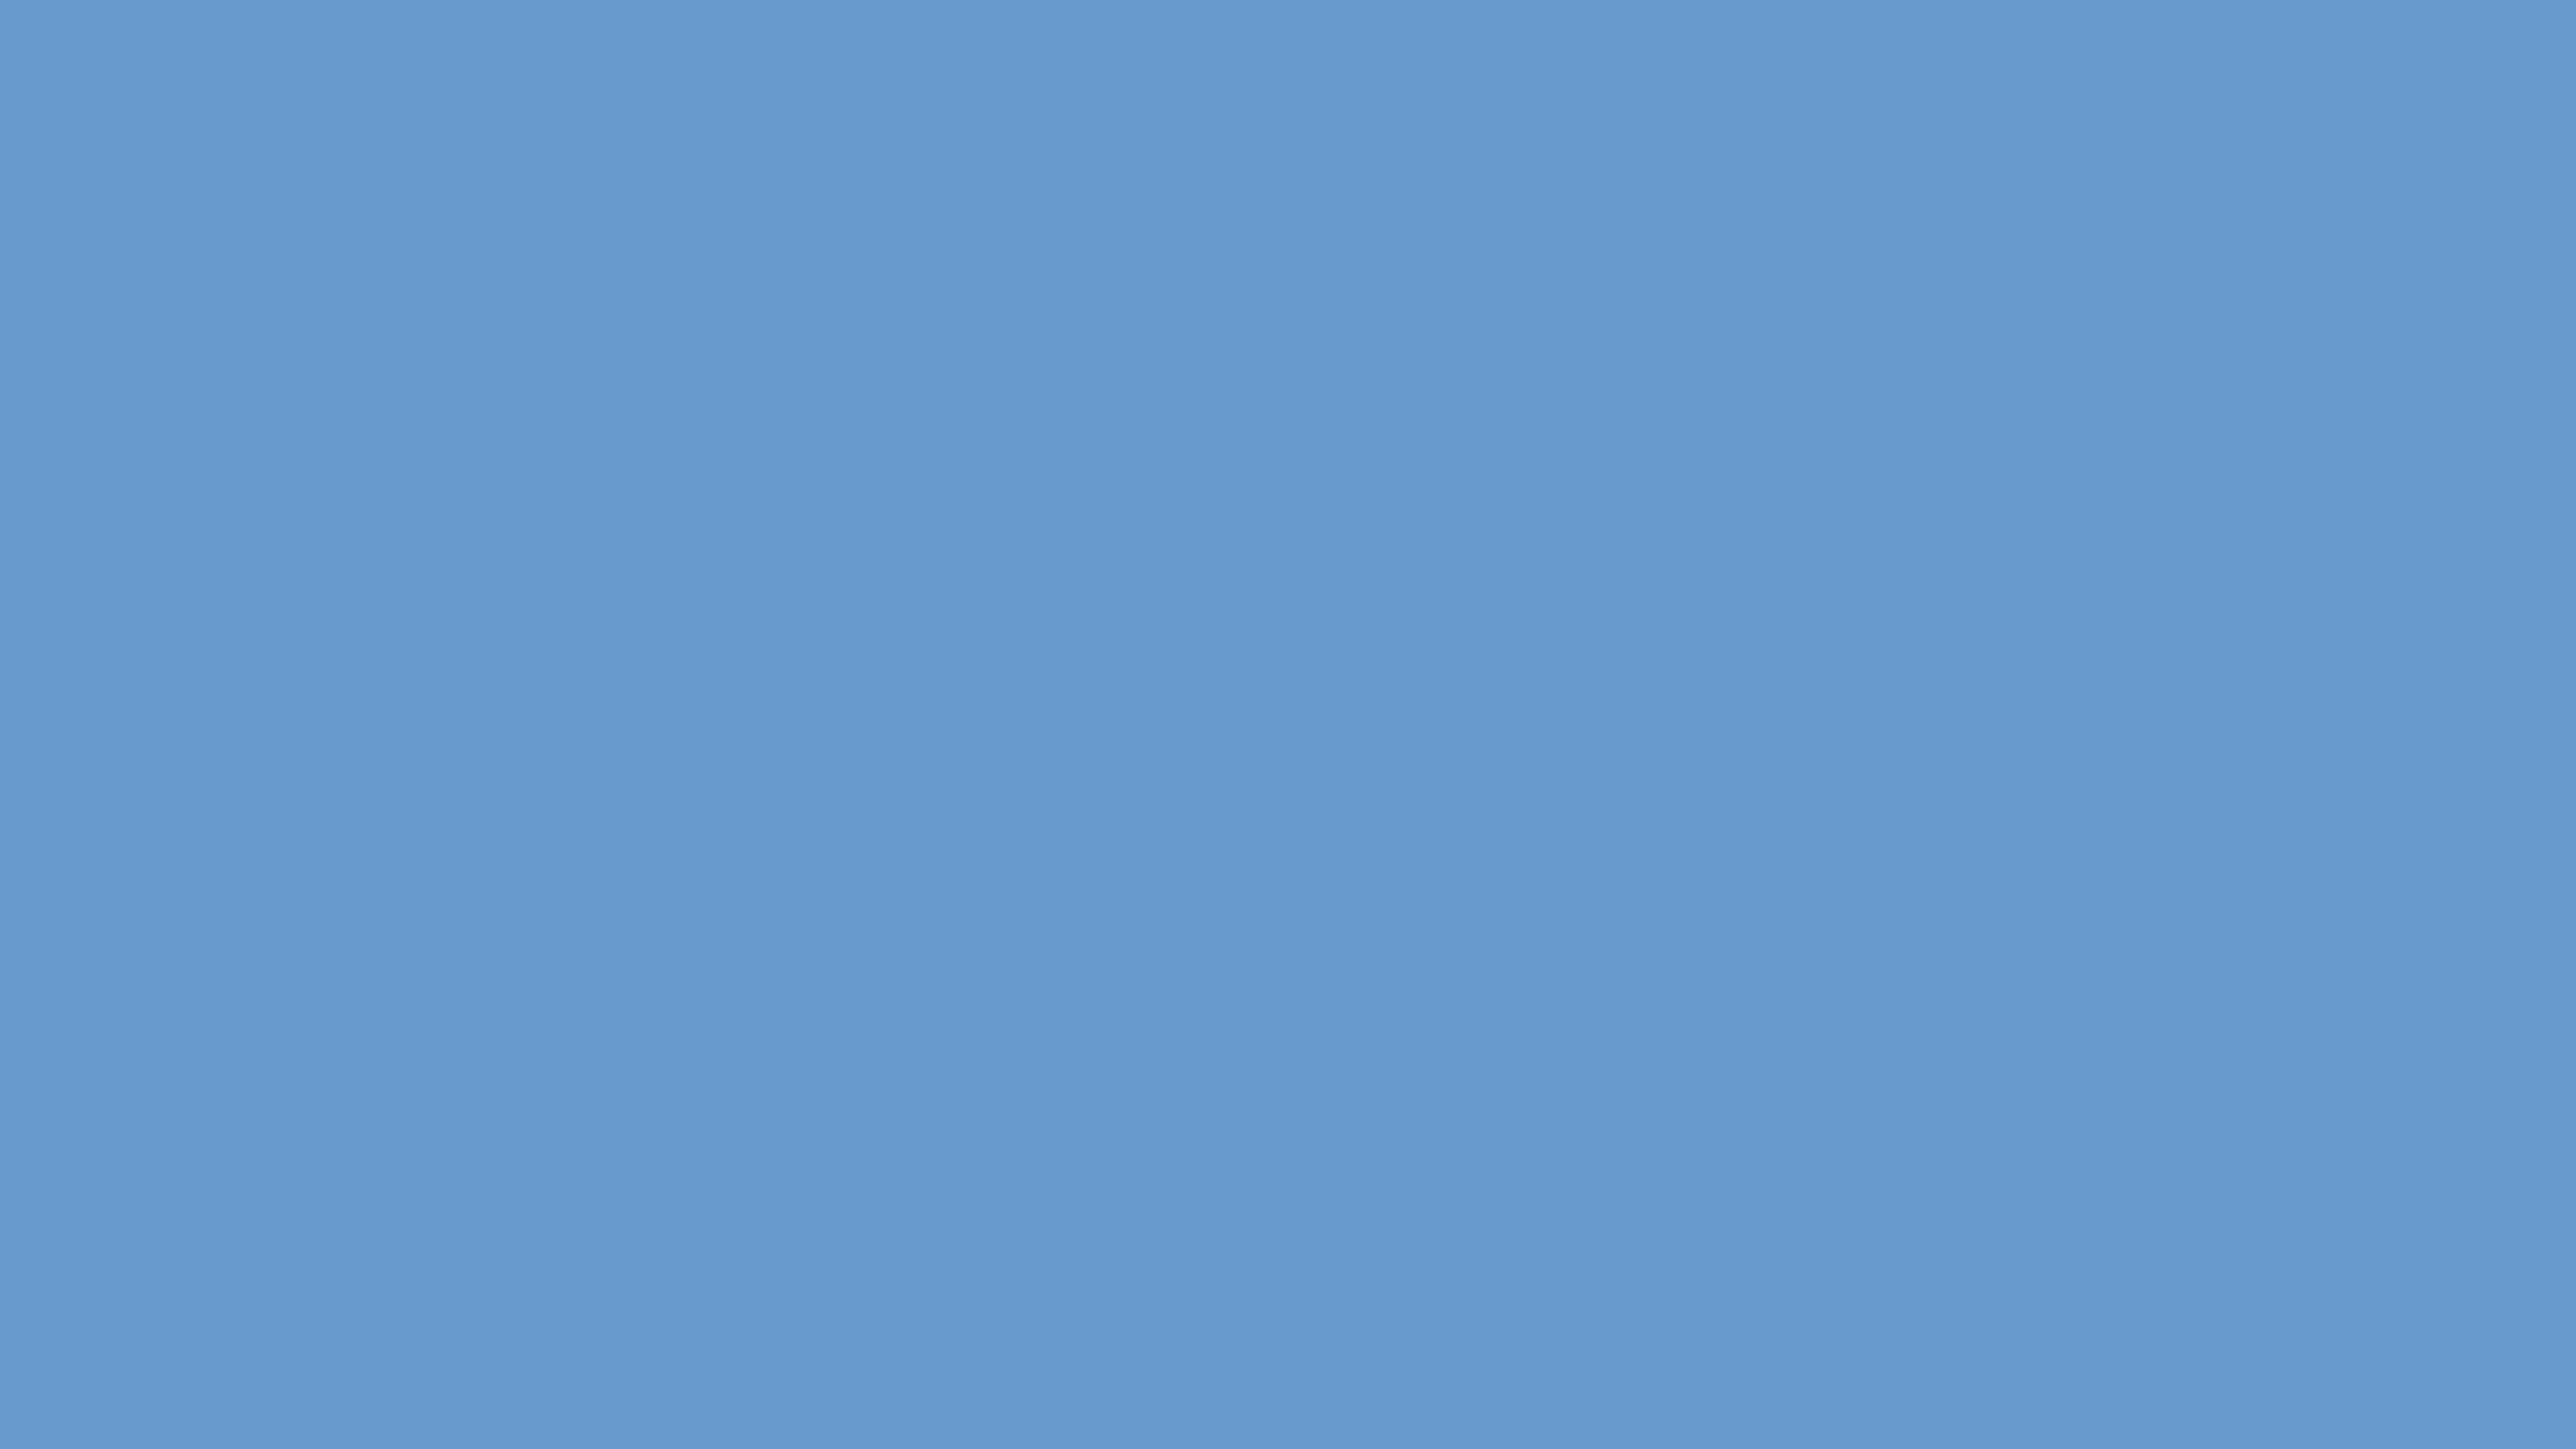 5120x2880 Blue-gray Solid Color Background